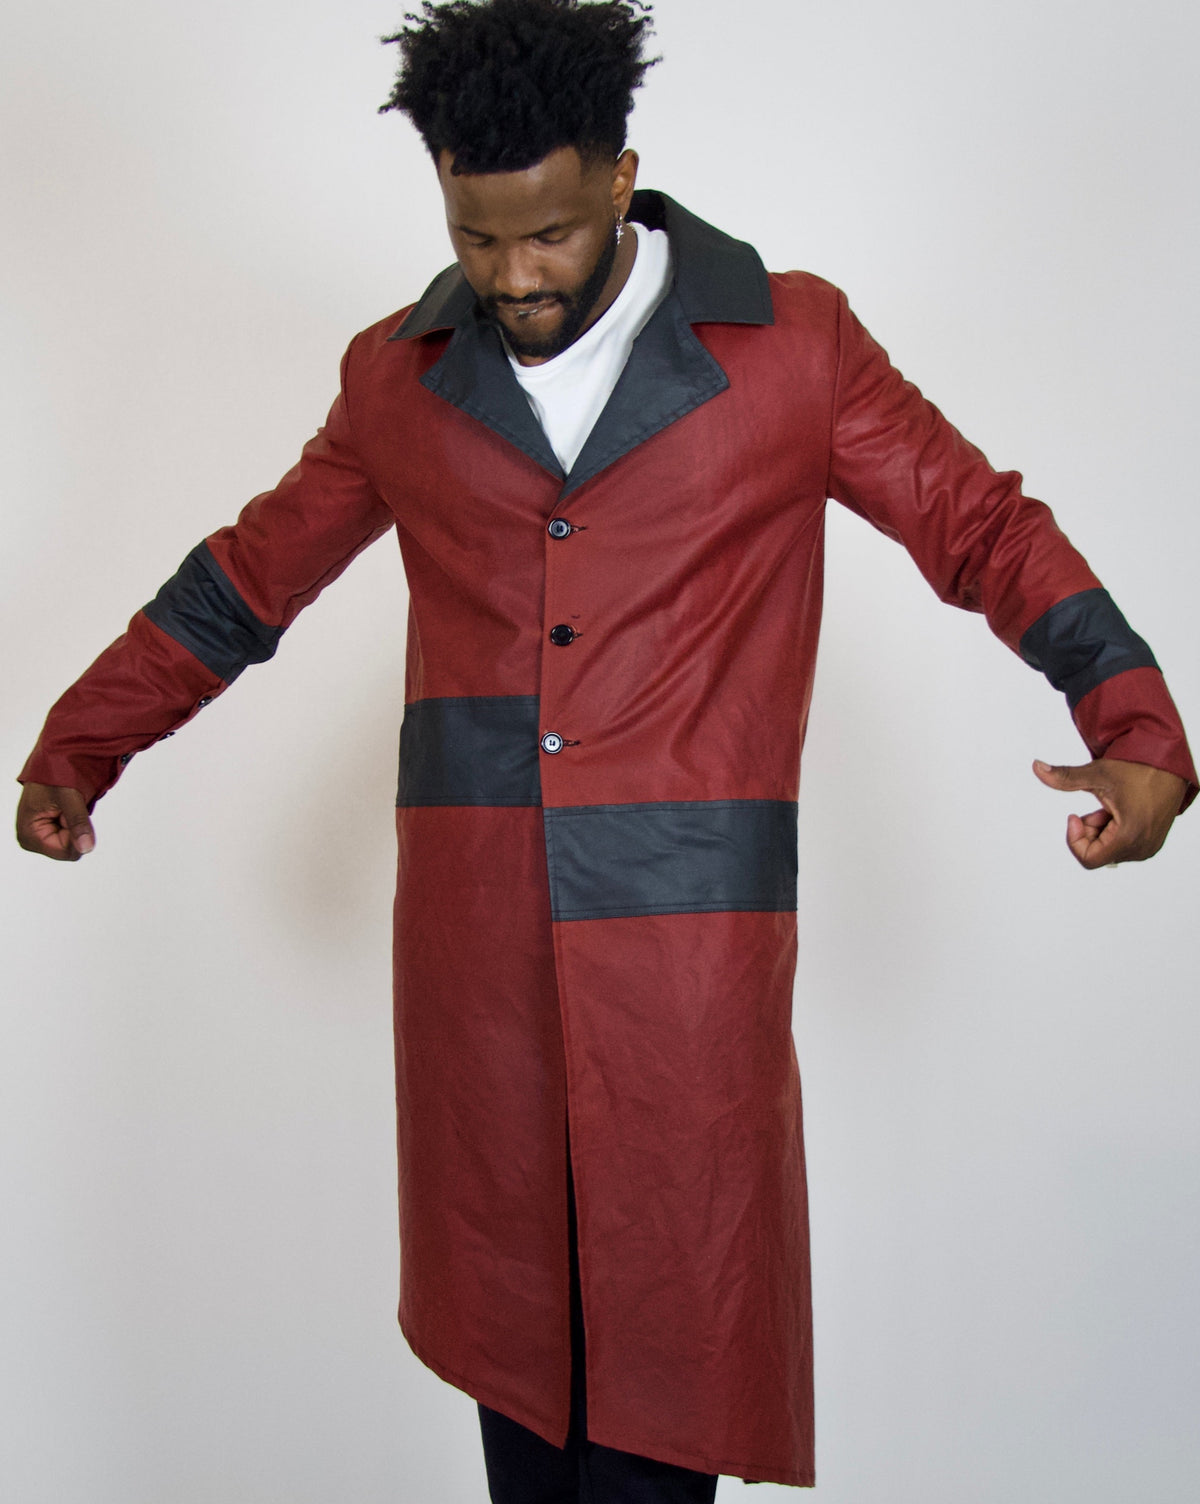 Kannon Trench Coat - Red and Black